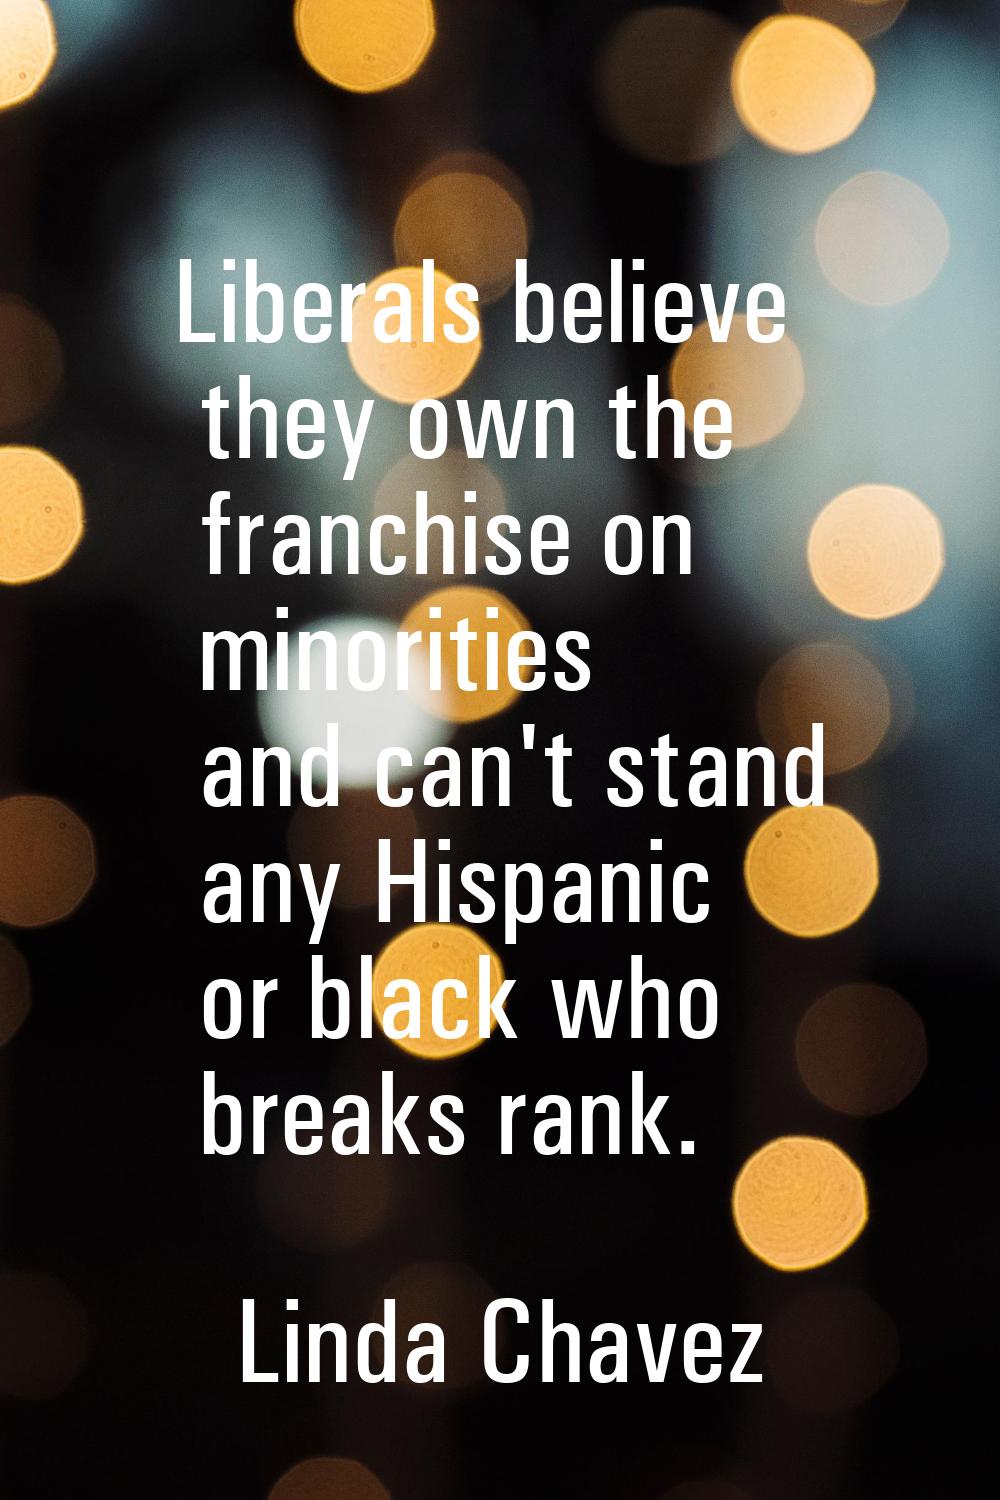 Liberals believe they own the franchise on minorities and can't stand any Hispanic or black who bre